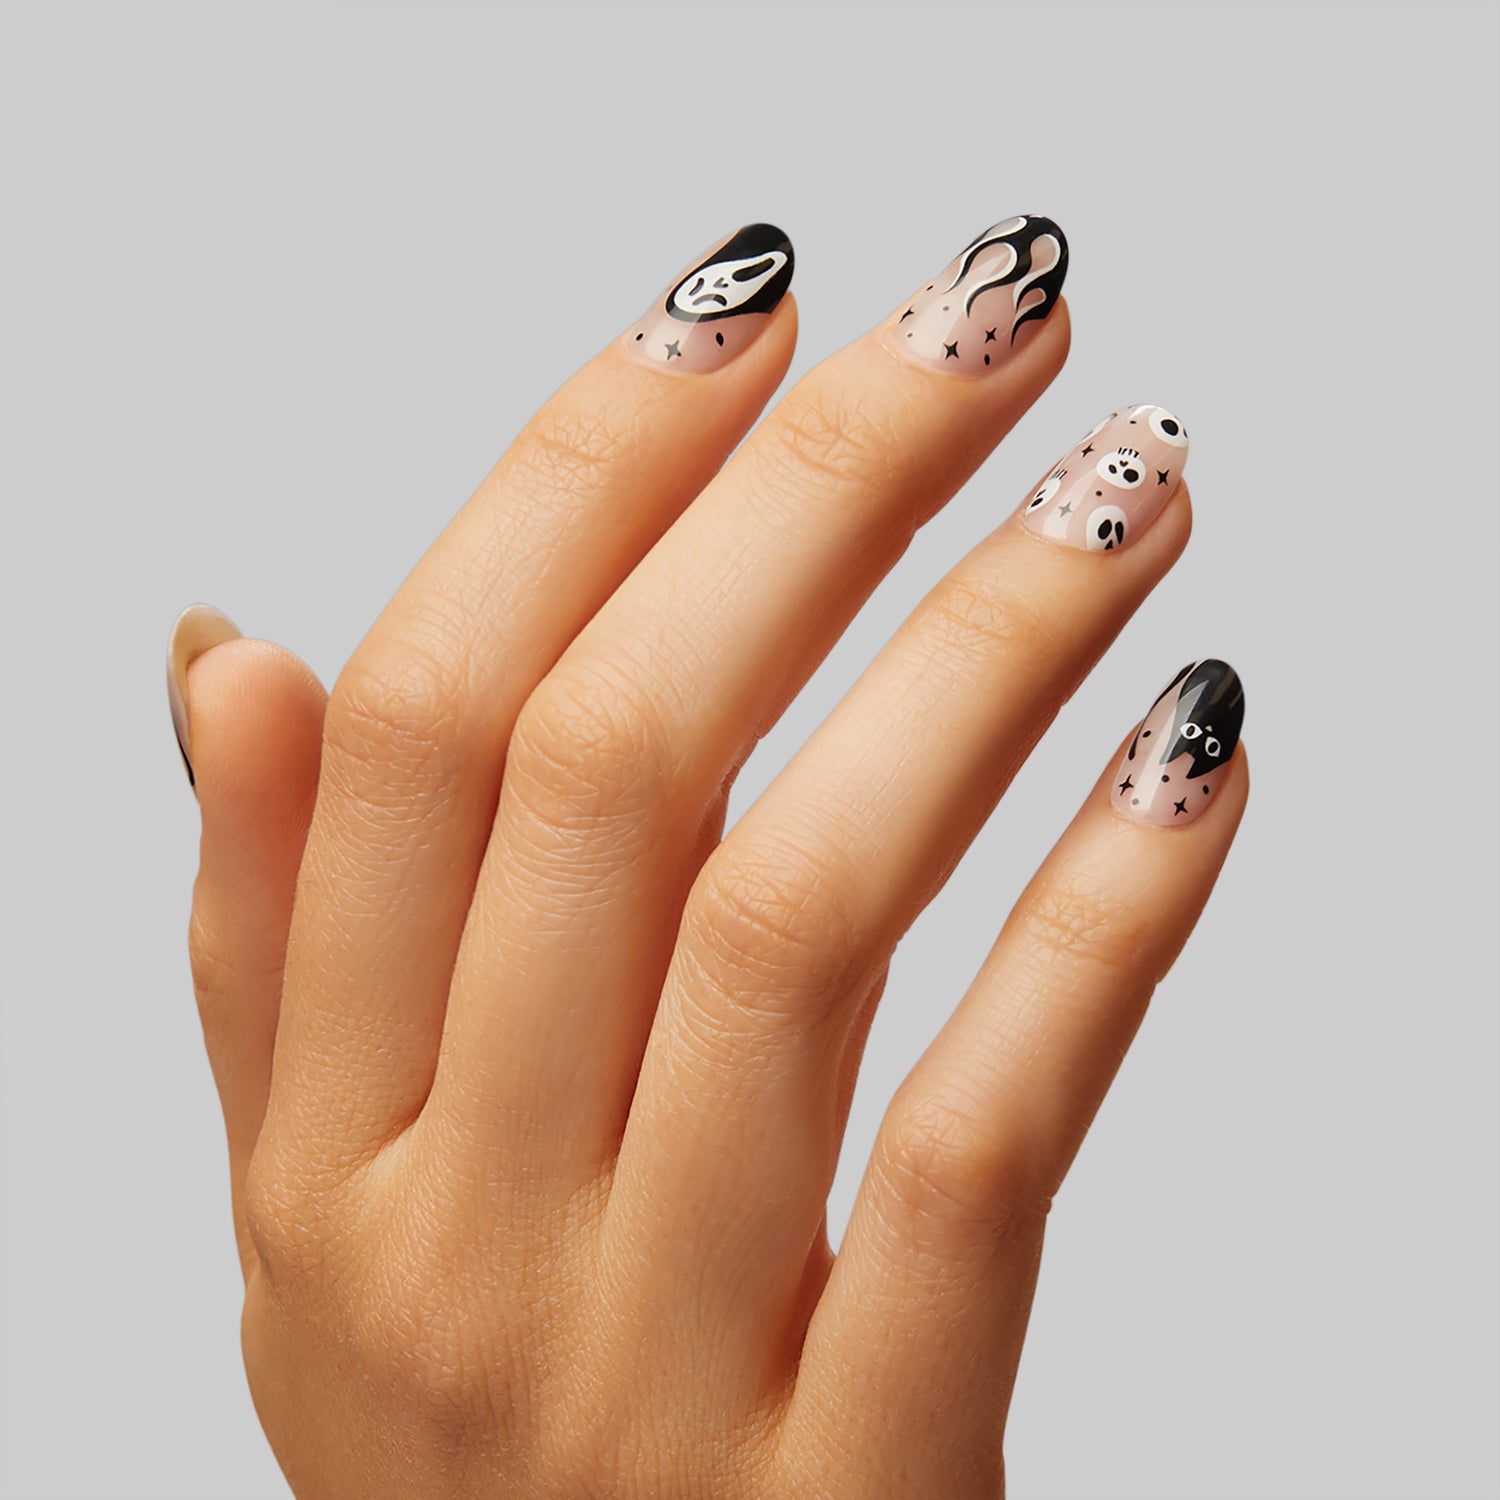  Medium length, almond shape, glossy finish. Sheer nude pink press-on gel nails featuring bats, black cats, and skull icons.